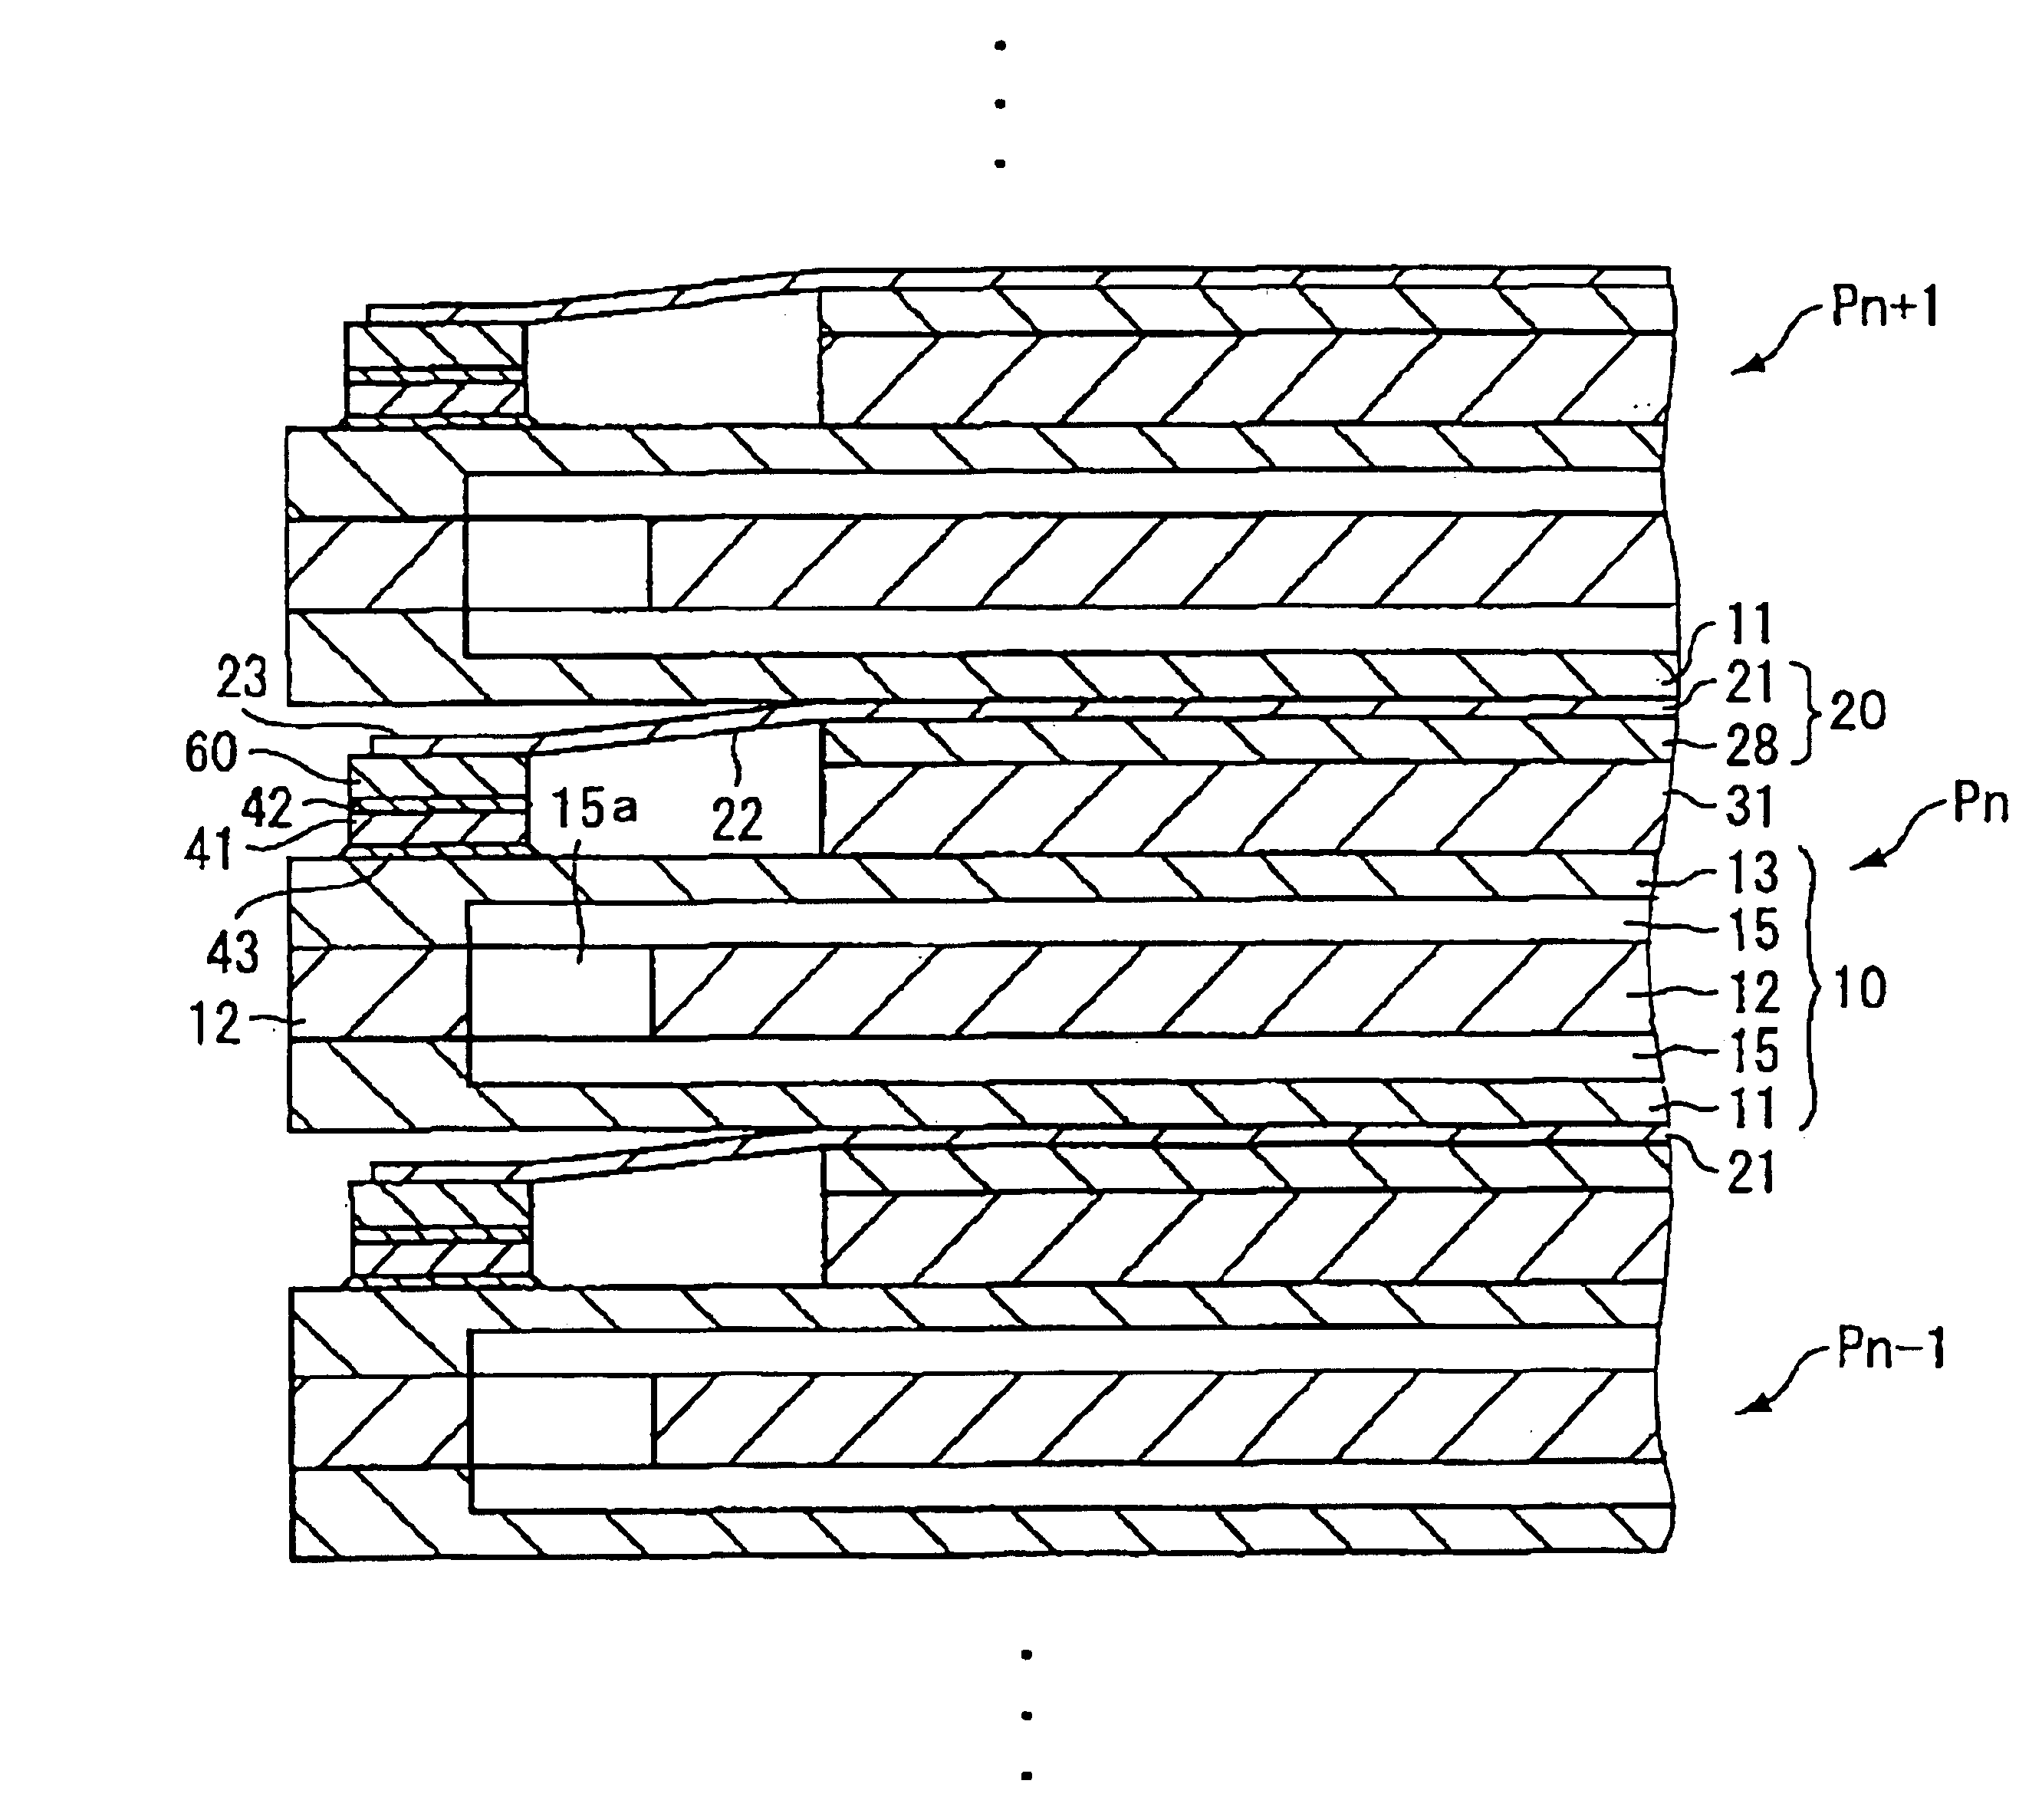 Two-dimensional laser diode array light-emitting device